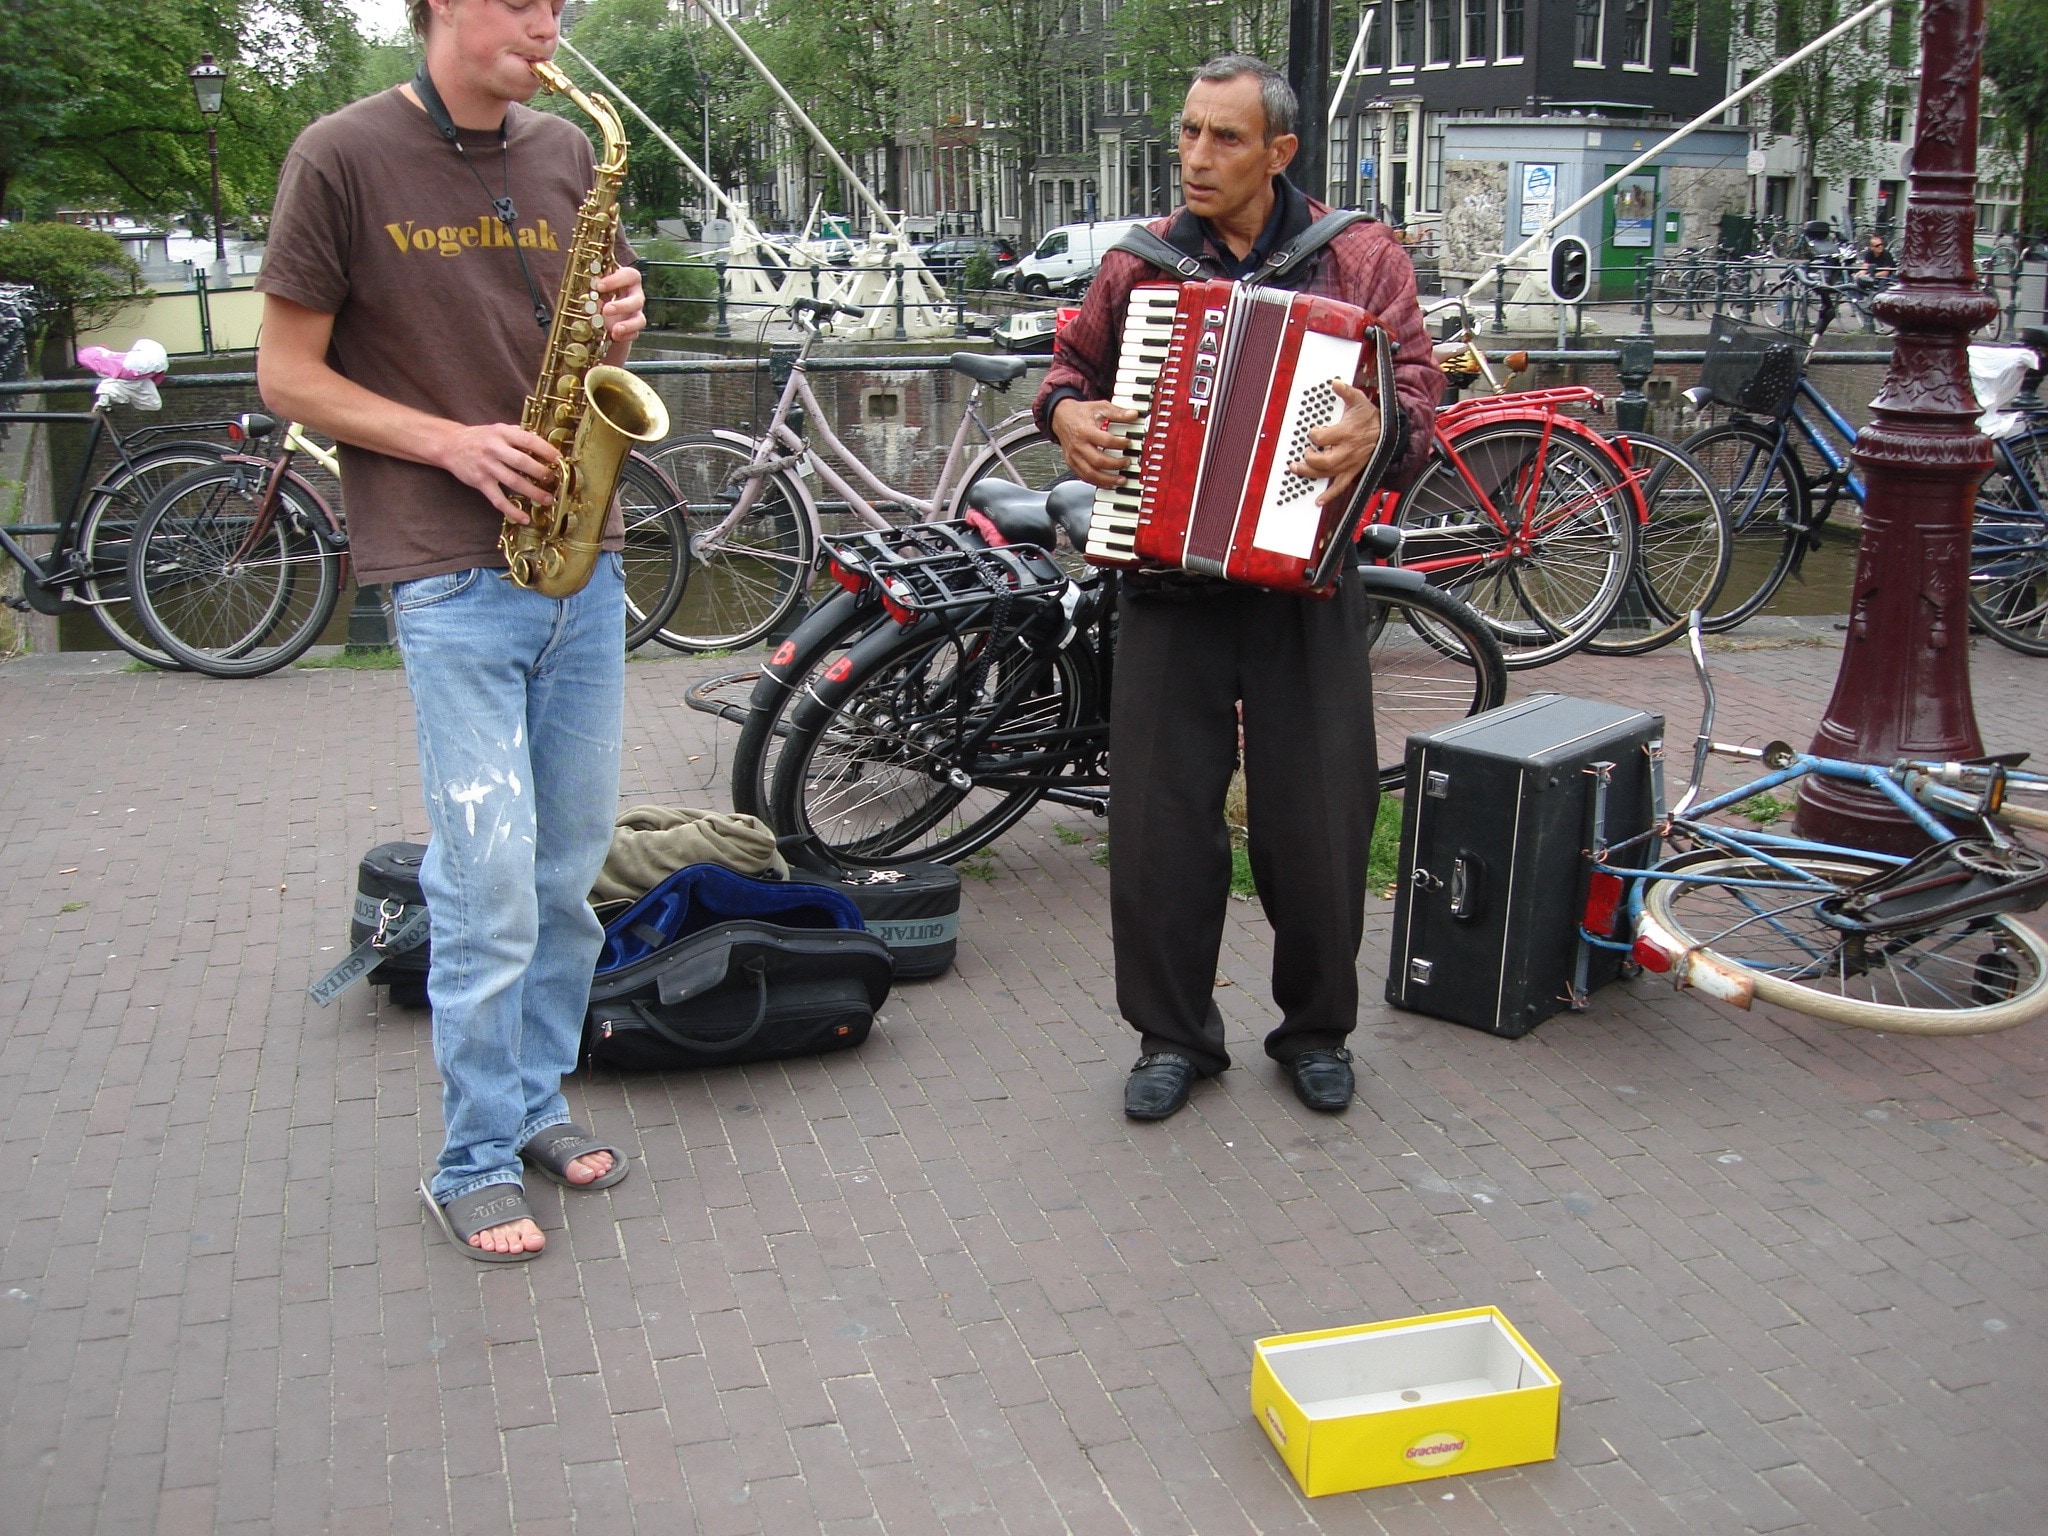 Accordion, Street Musicians, Musicians, bicycle, only men